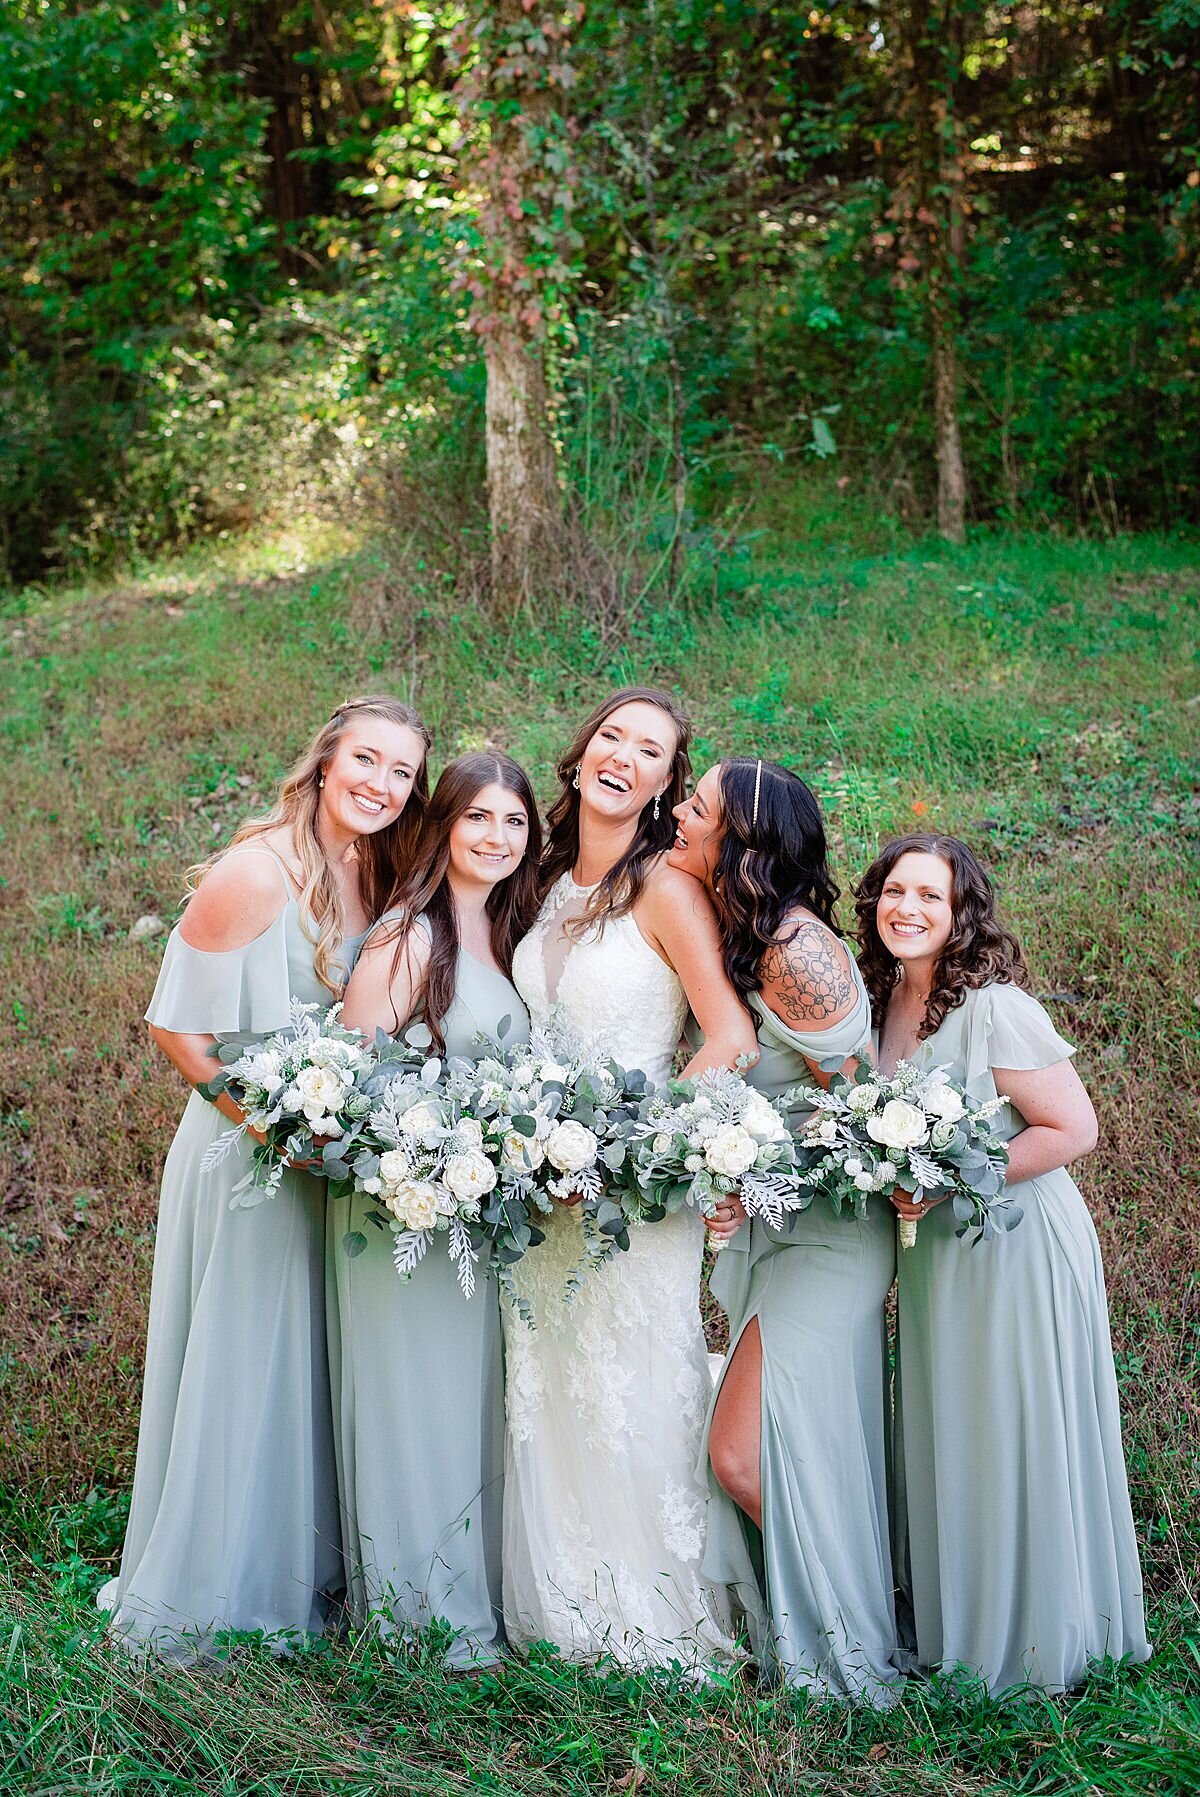 Bridesmaids wearing a soft eucalyptus shade dress and laughing alongside a bride in a valley